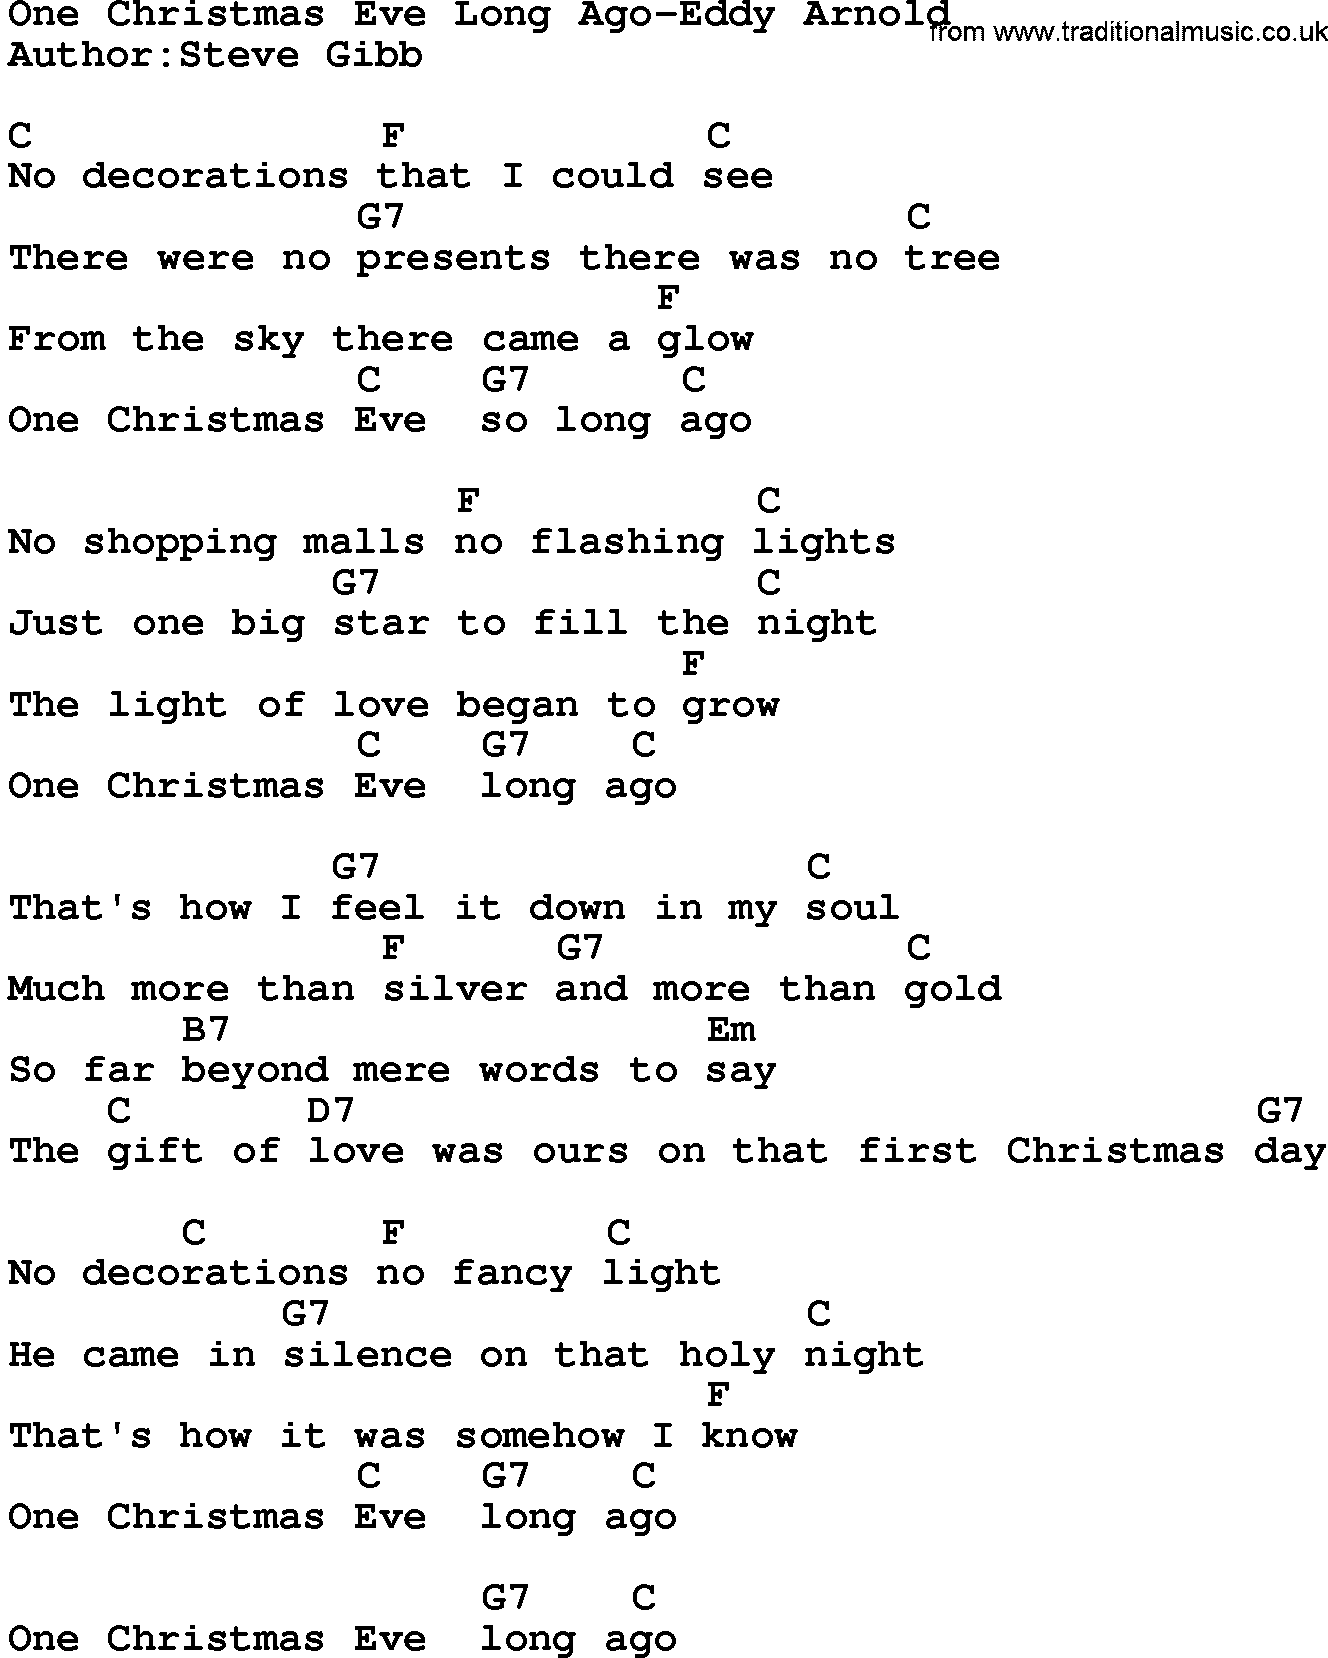 Country music song: One Christmas Eve Long Ago-Eddy Arnold lyrics and chords